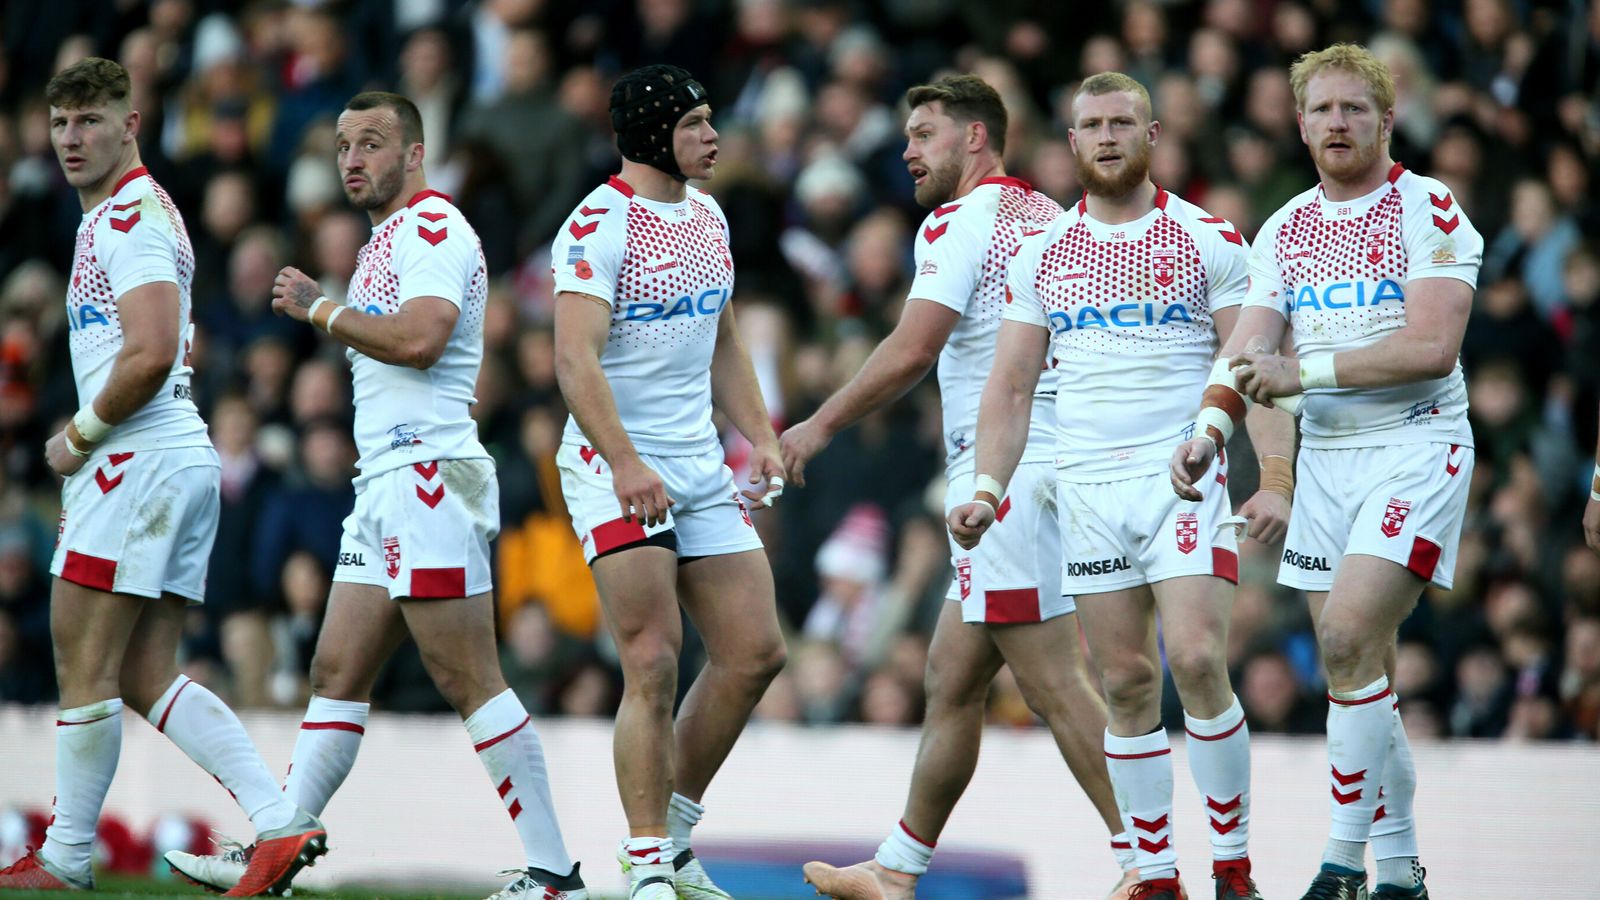 England To Face All Stars Select Team As Part Of Preparations For 2021 Rugby League World Cup